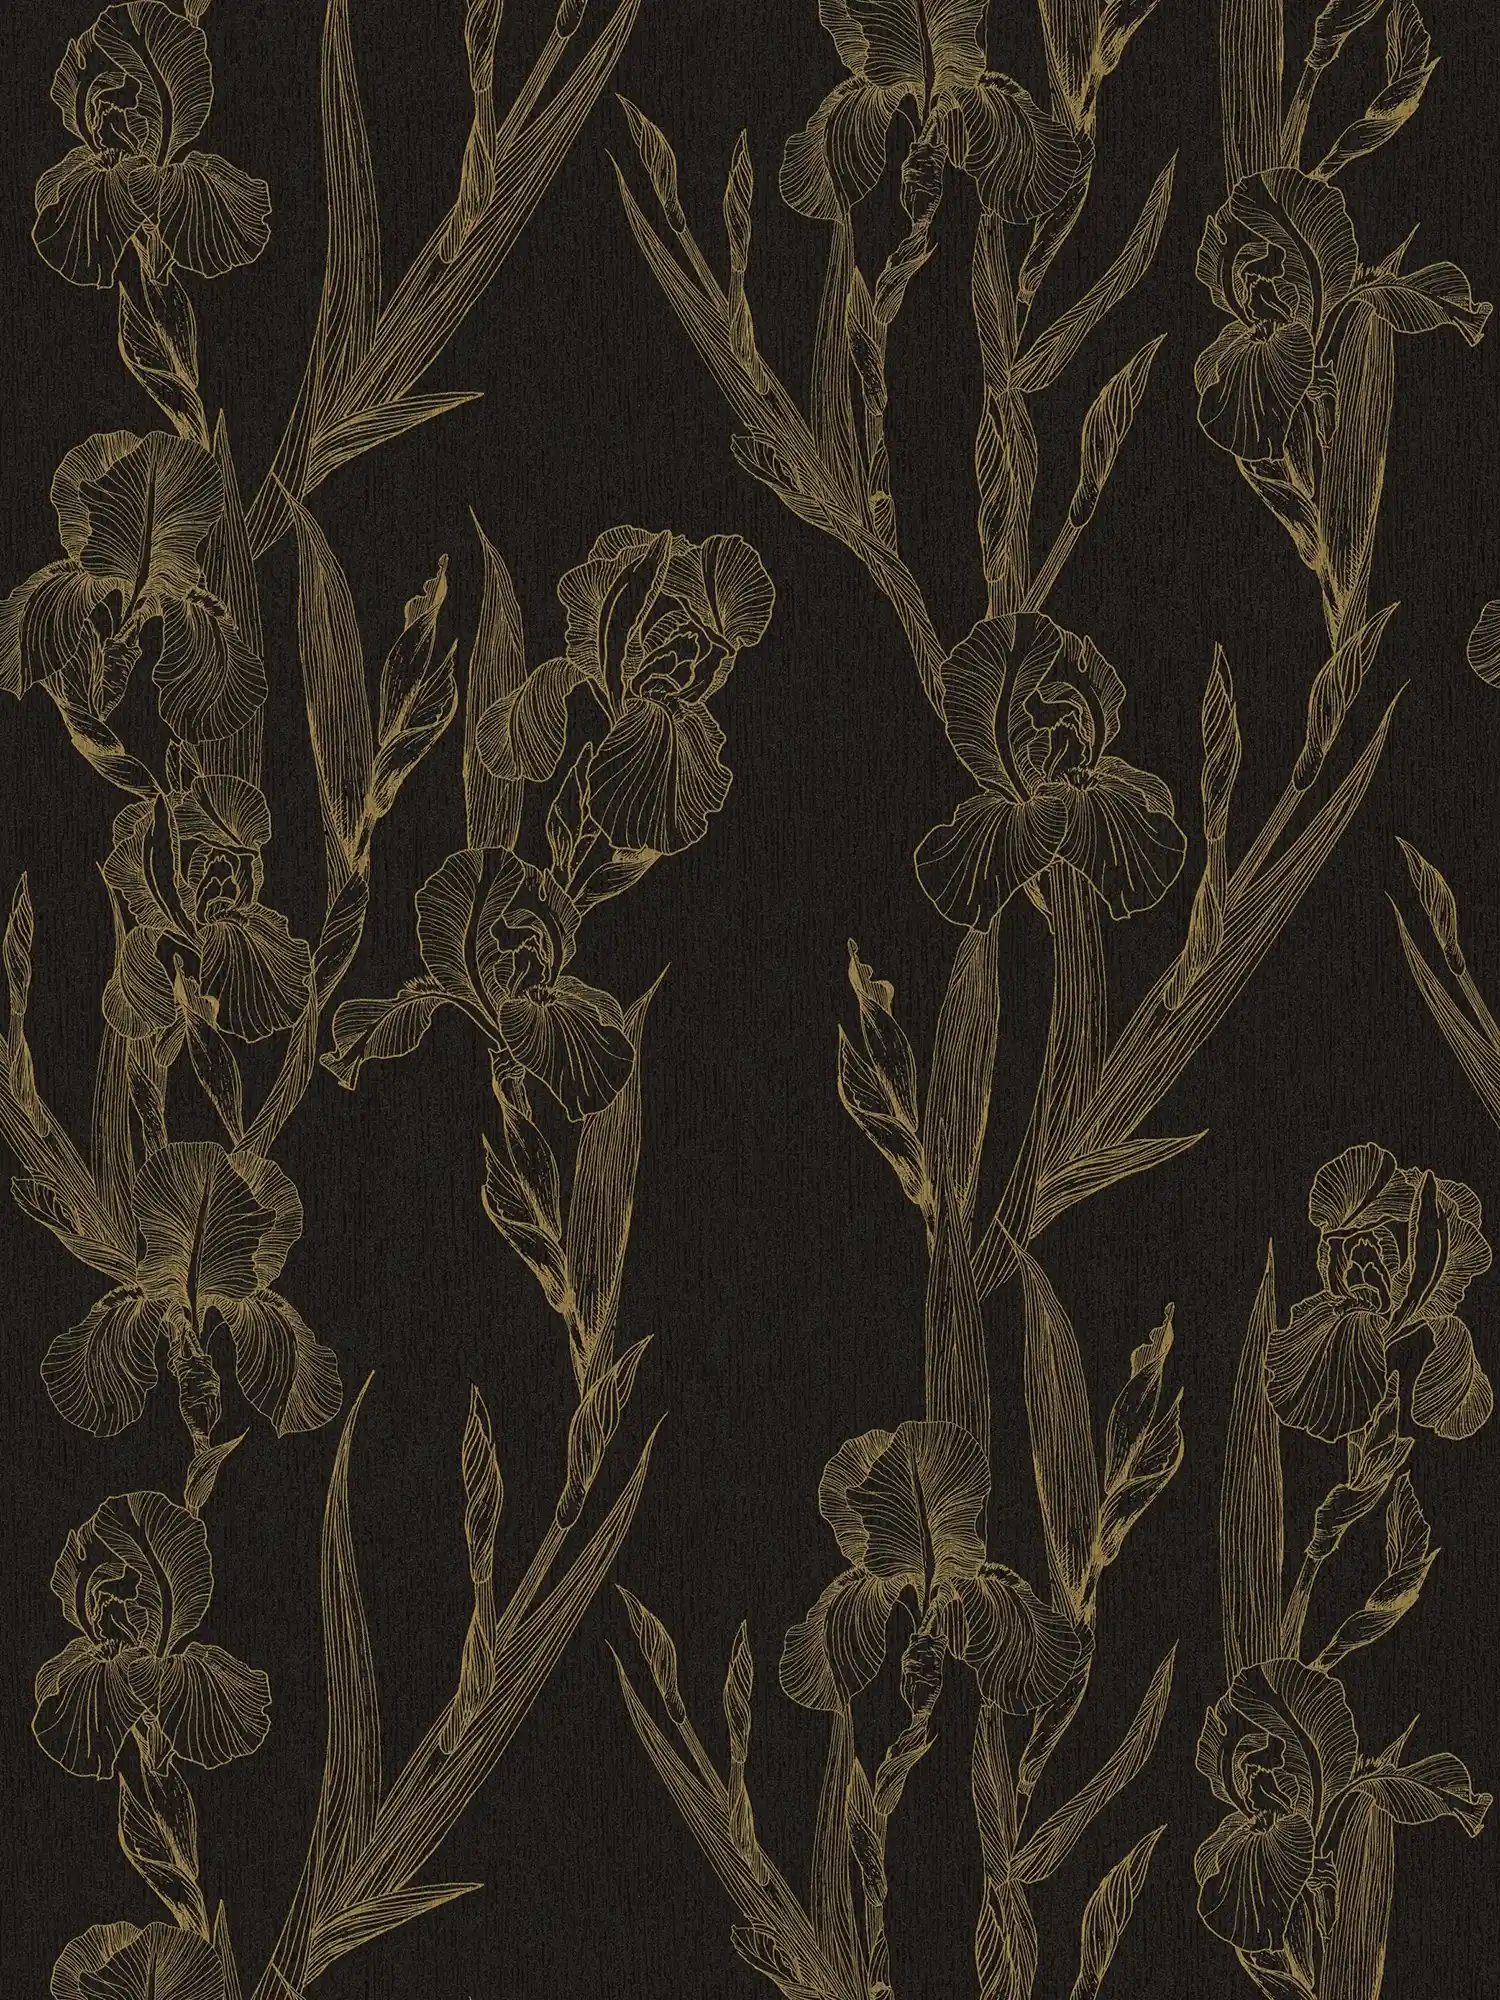 Floral pattern wallpaper with flowers in drawing style - black, yellow
